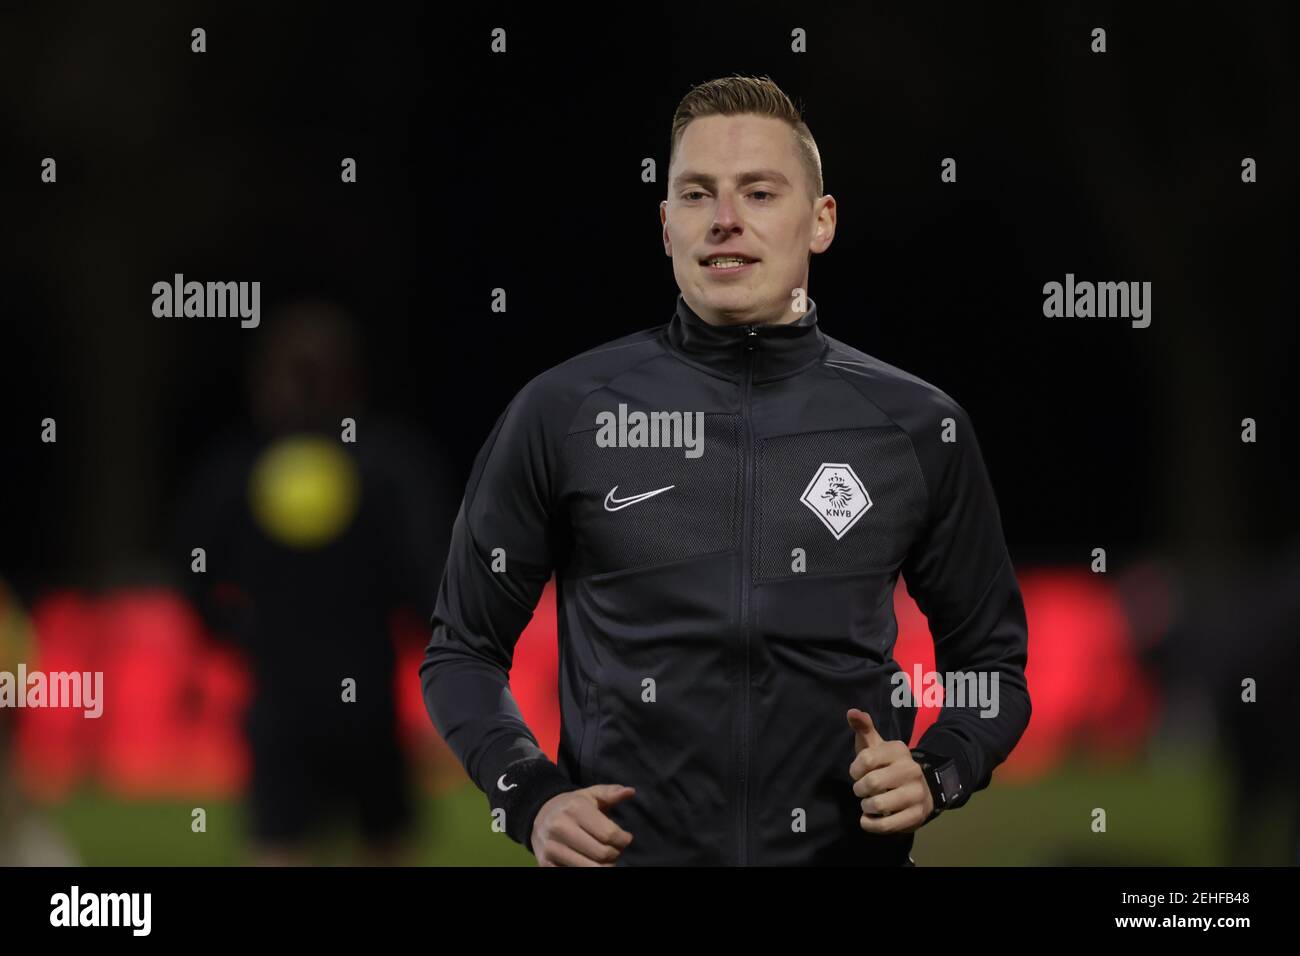 EINDHOVEN, NETHERLANDS - FEBRUARY 19: Assistant referee Marco Ribbink  during the Dutch Keukenkampioendivisie match between PSV U23 and FC Den  Bosch at Stock Photo - Alamy